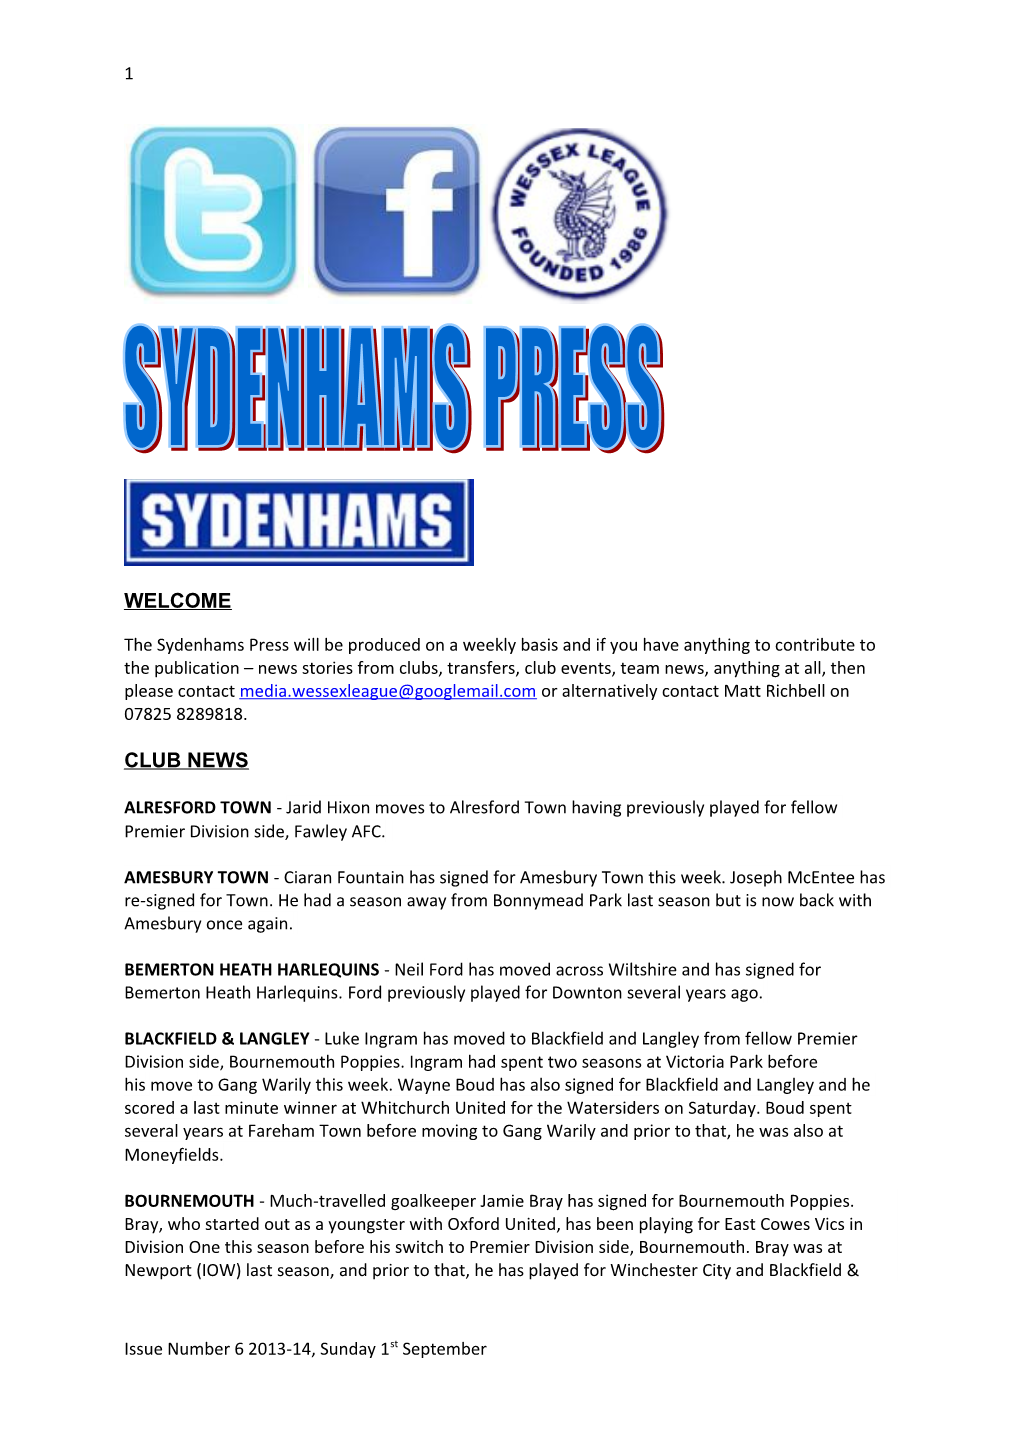 The Sydenhams Press Will Be Produced on a Weekly Basis and If You Have Anything to Contribute